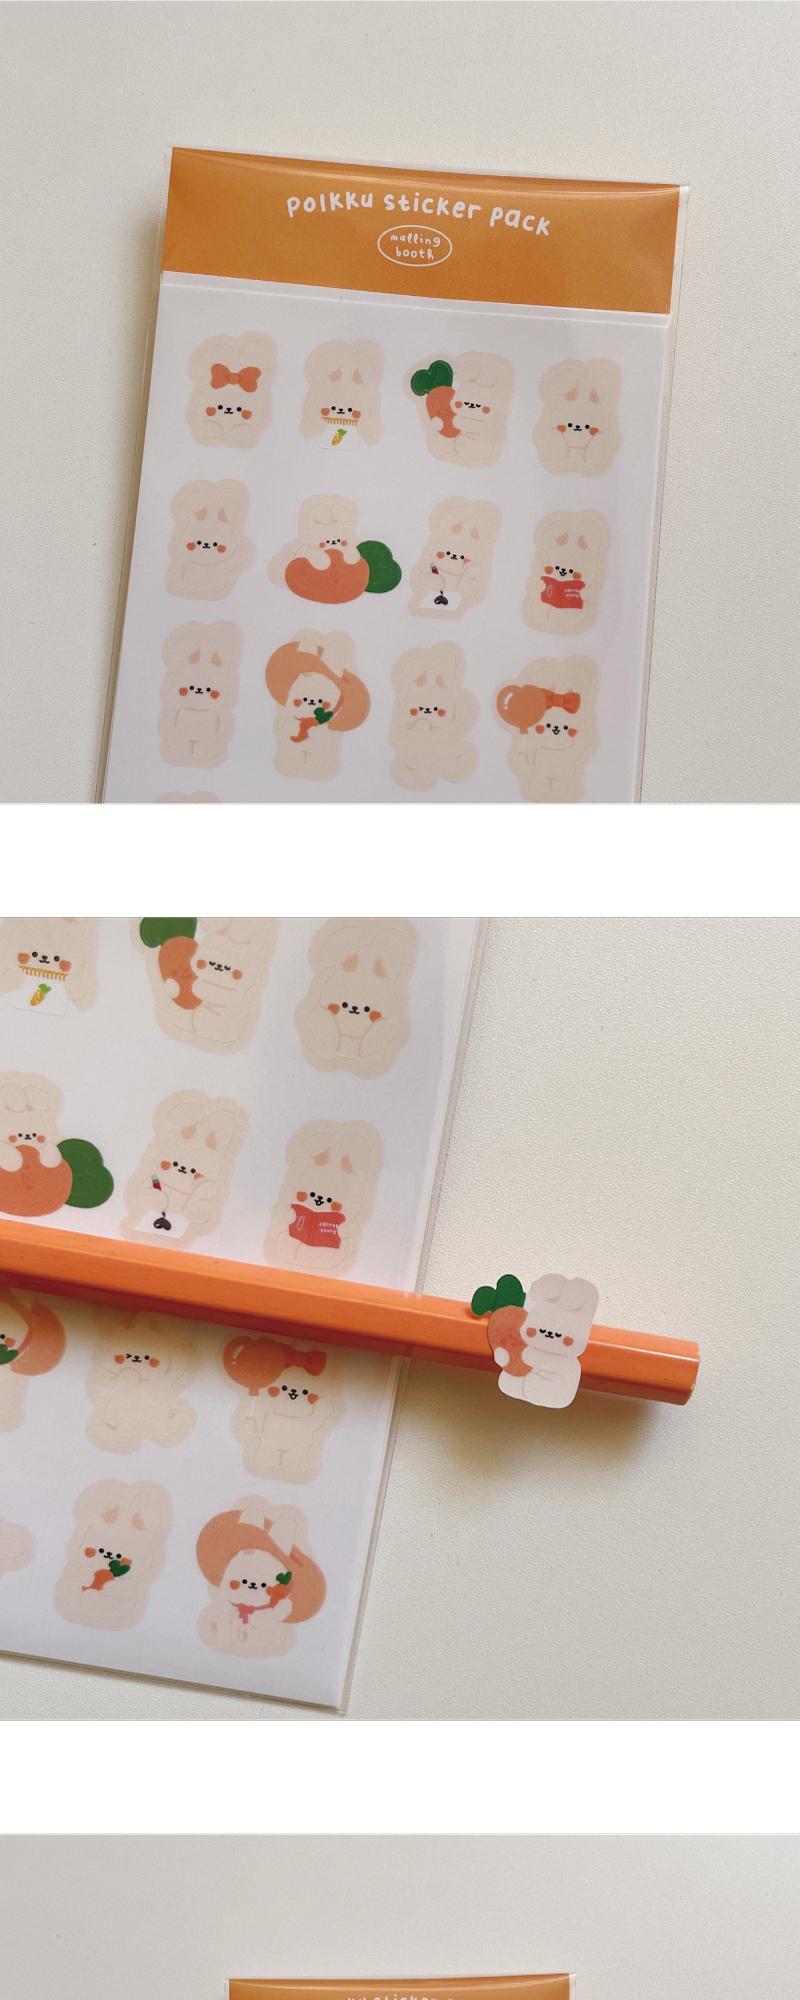 [HOLIDAY TIME] Polkku sticker pack Carrot Hato